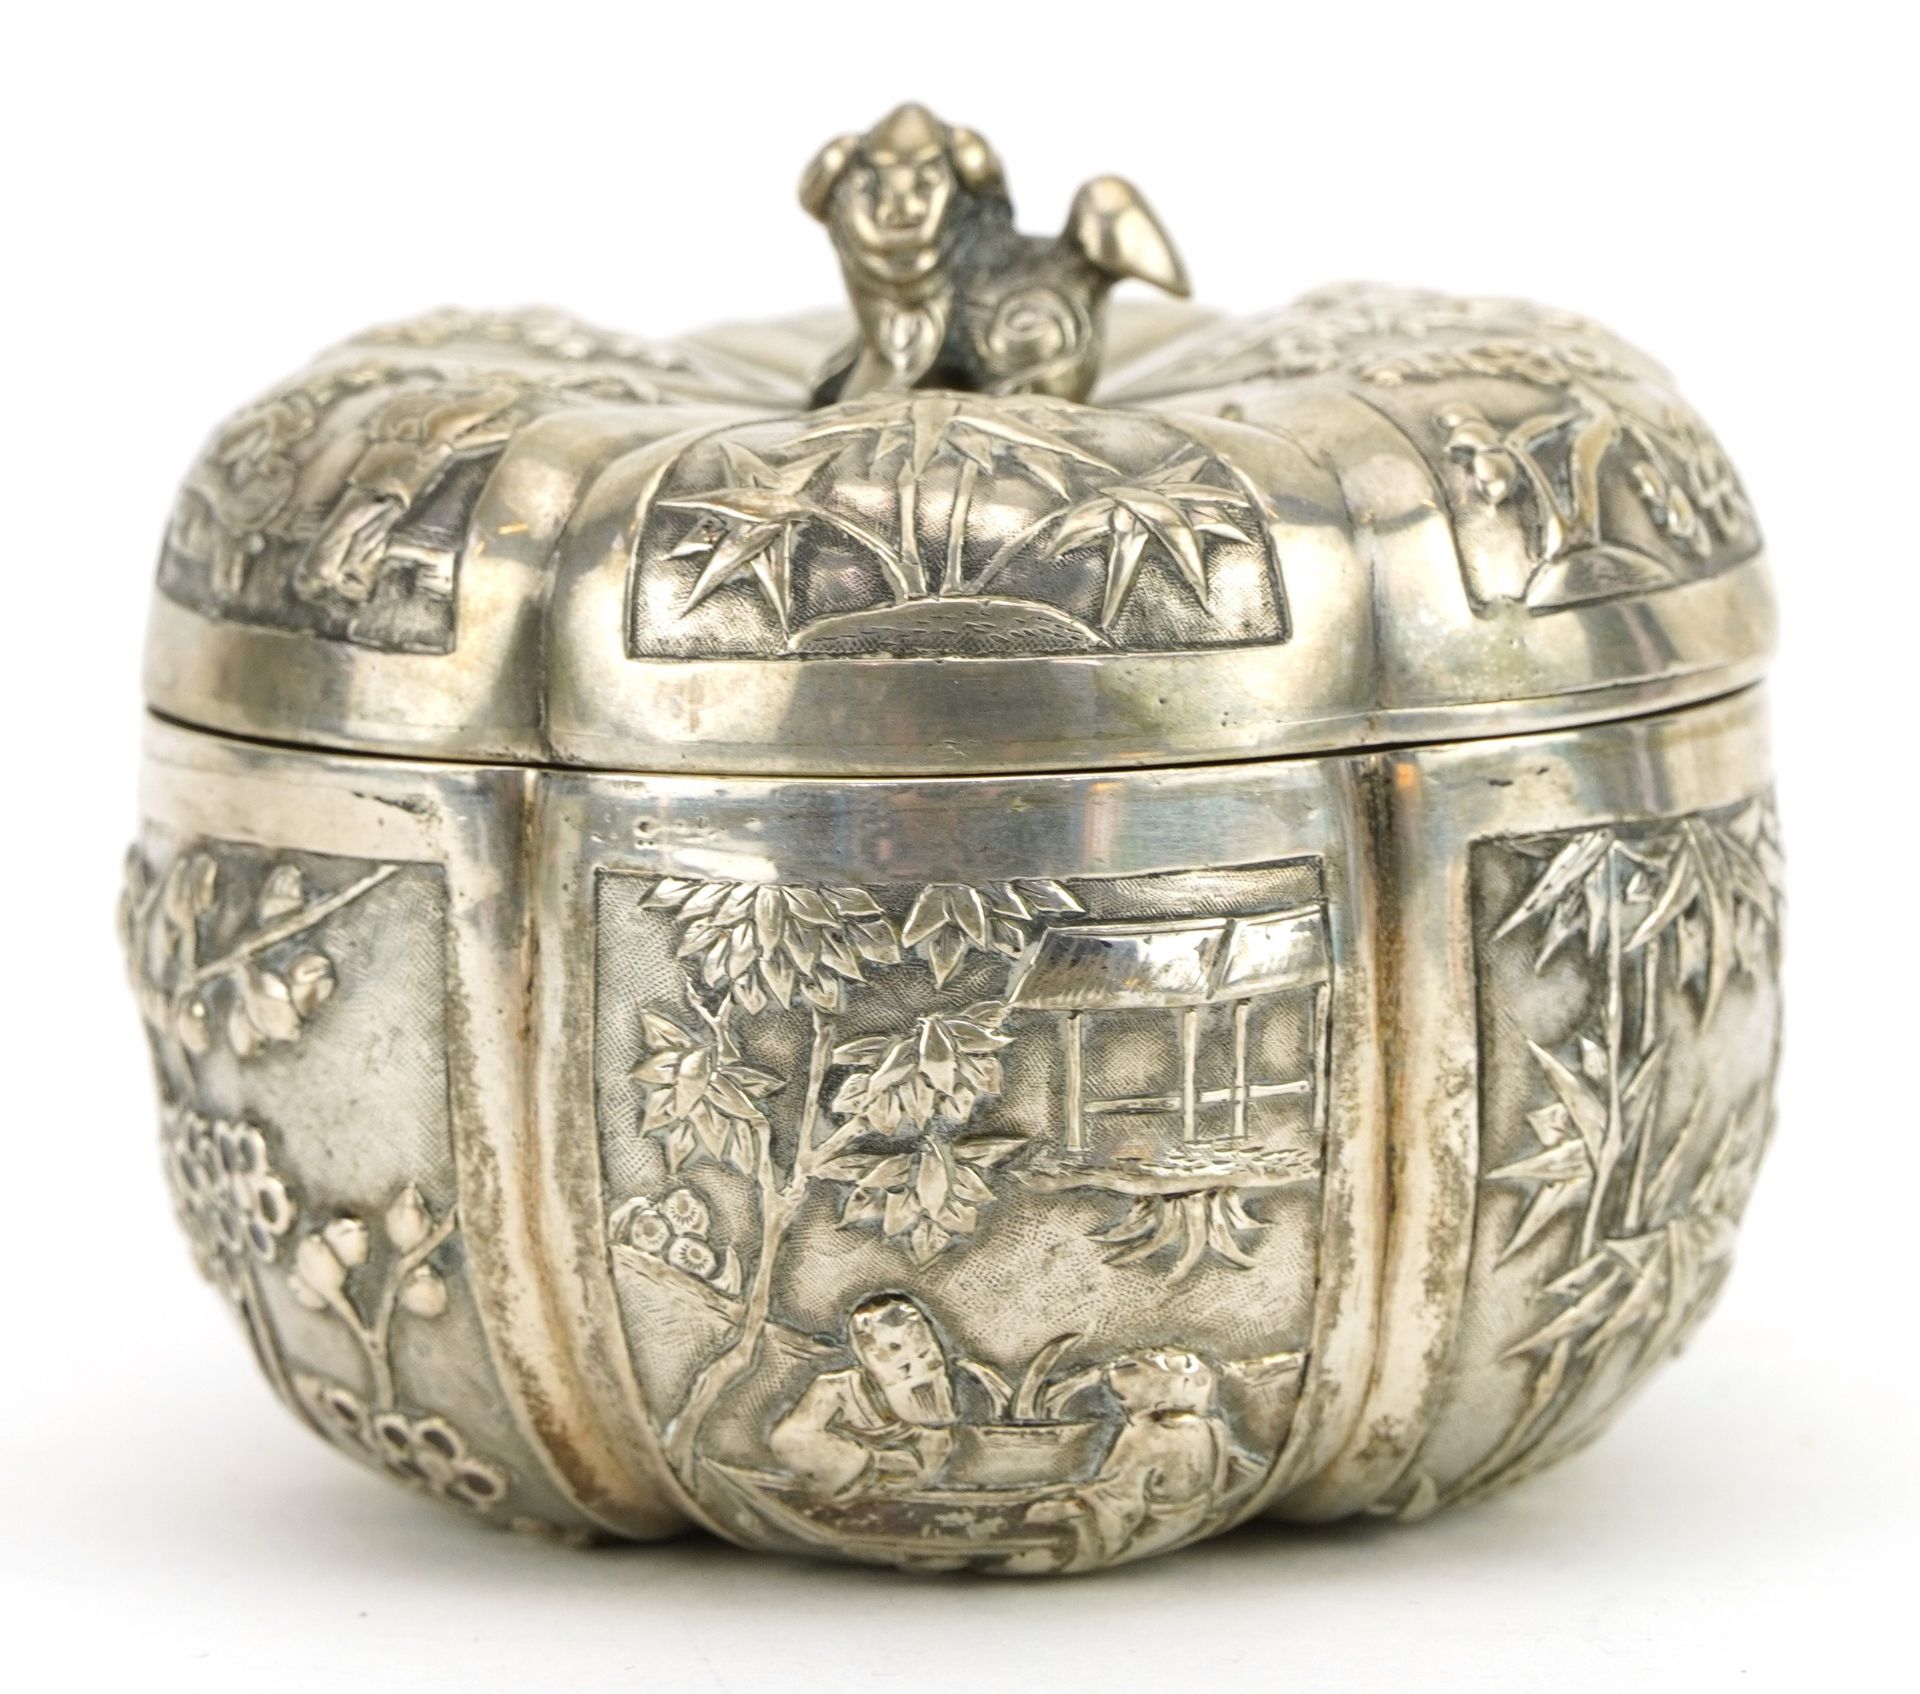 Good Chinese export silver box and cover in the form of a pumpkin embossed with figures, bamboo